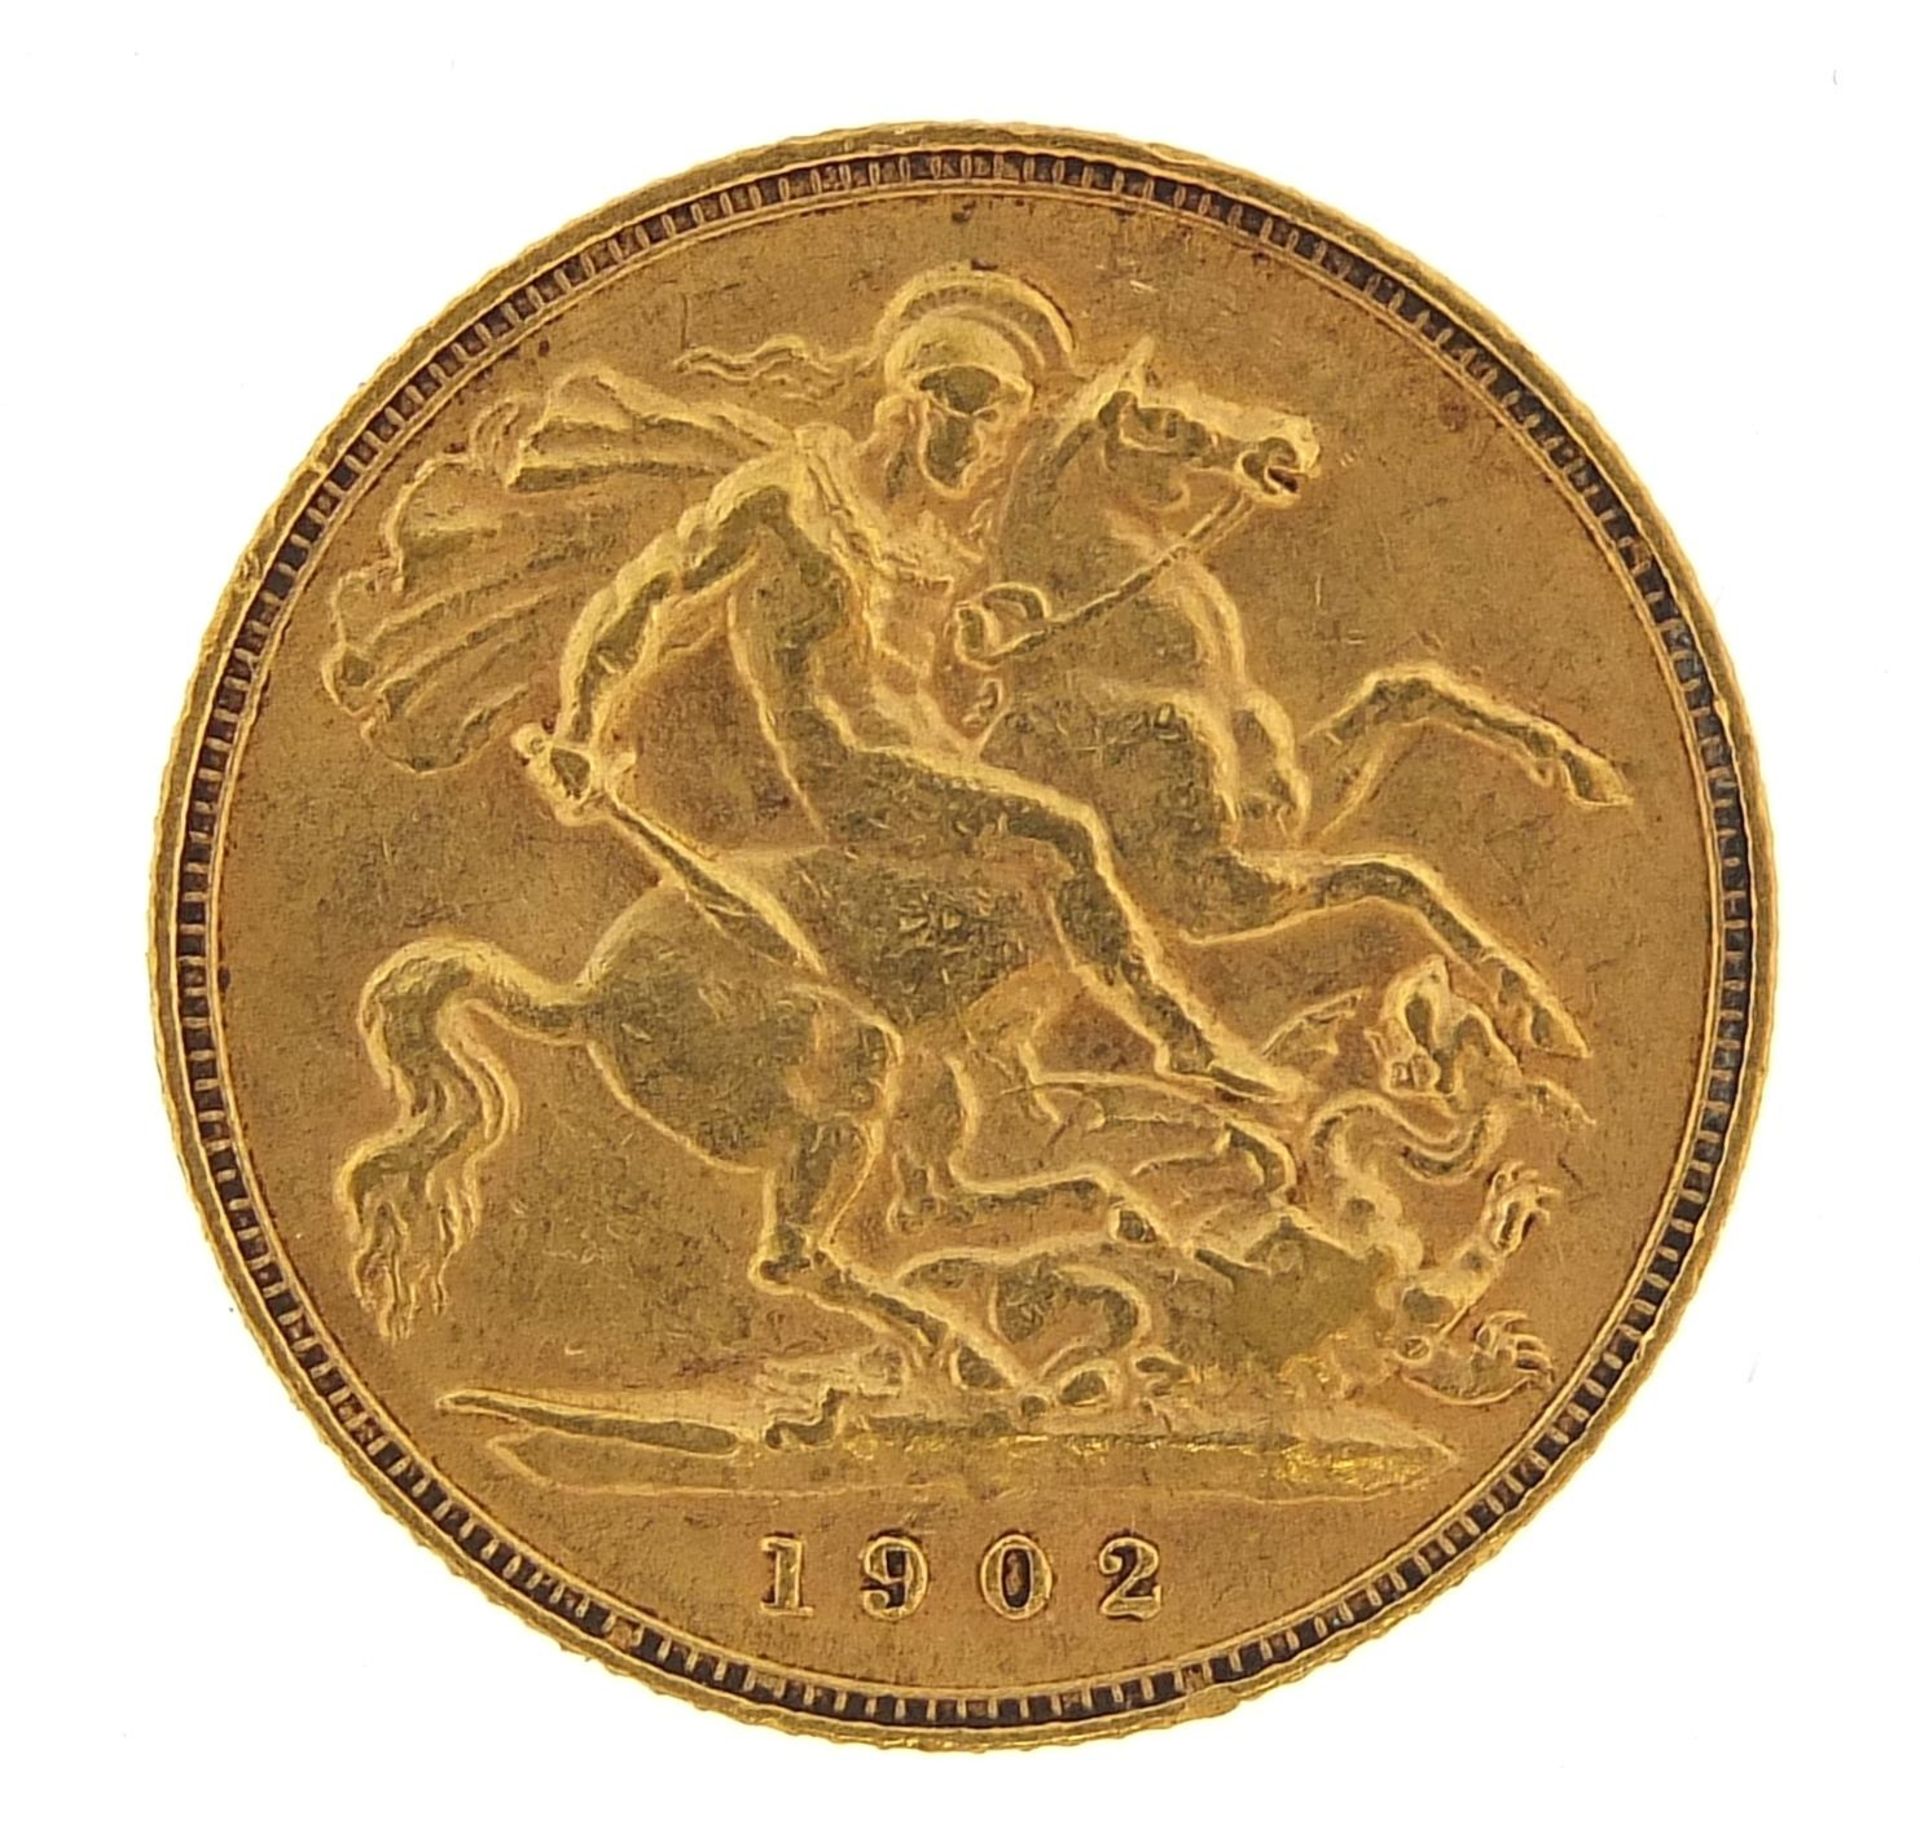 Edward VII 1902 gold half sovereign - this lot is sold without buyer?s premium, the hammer price